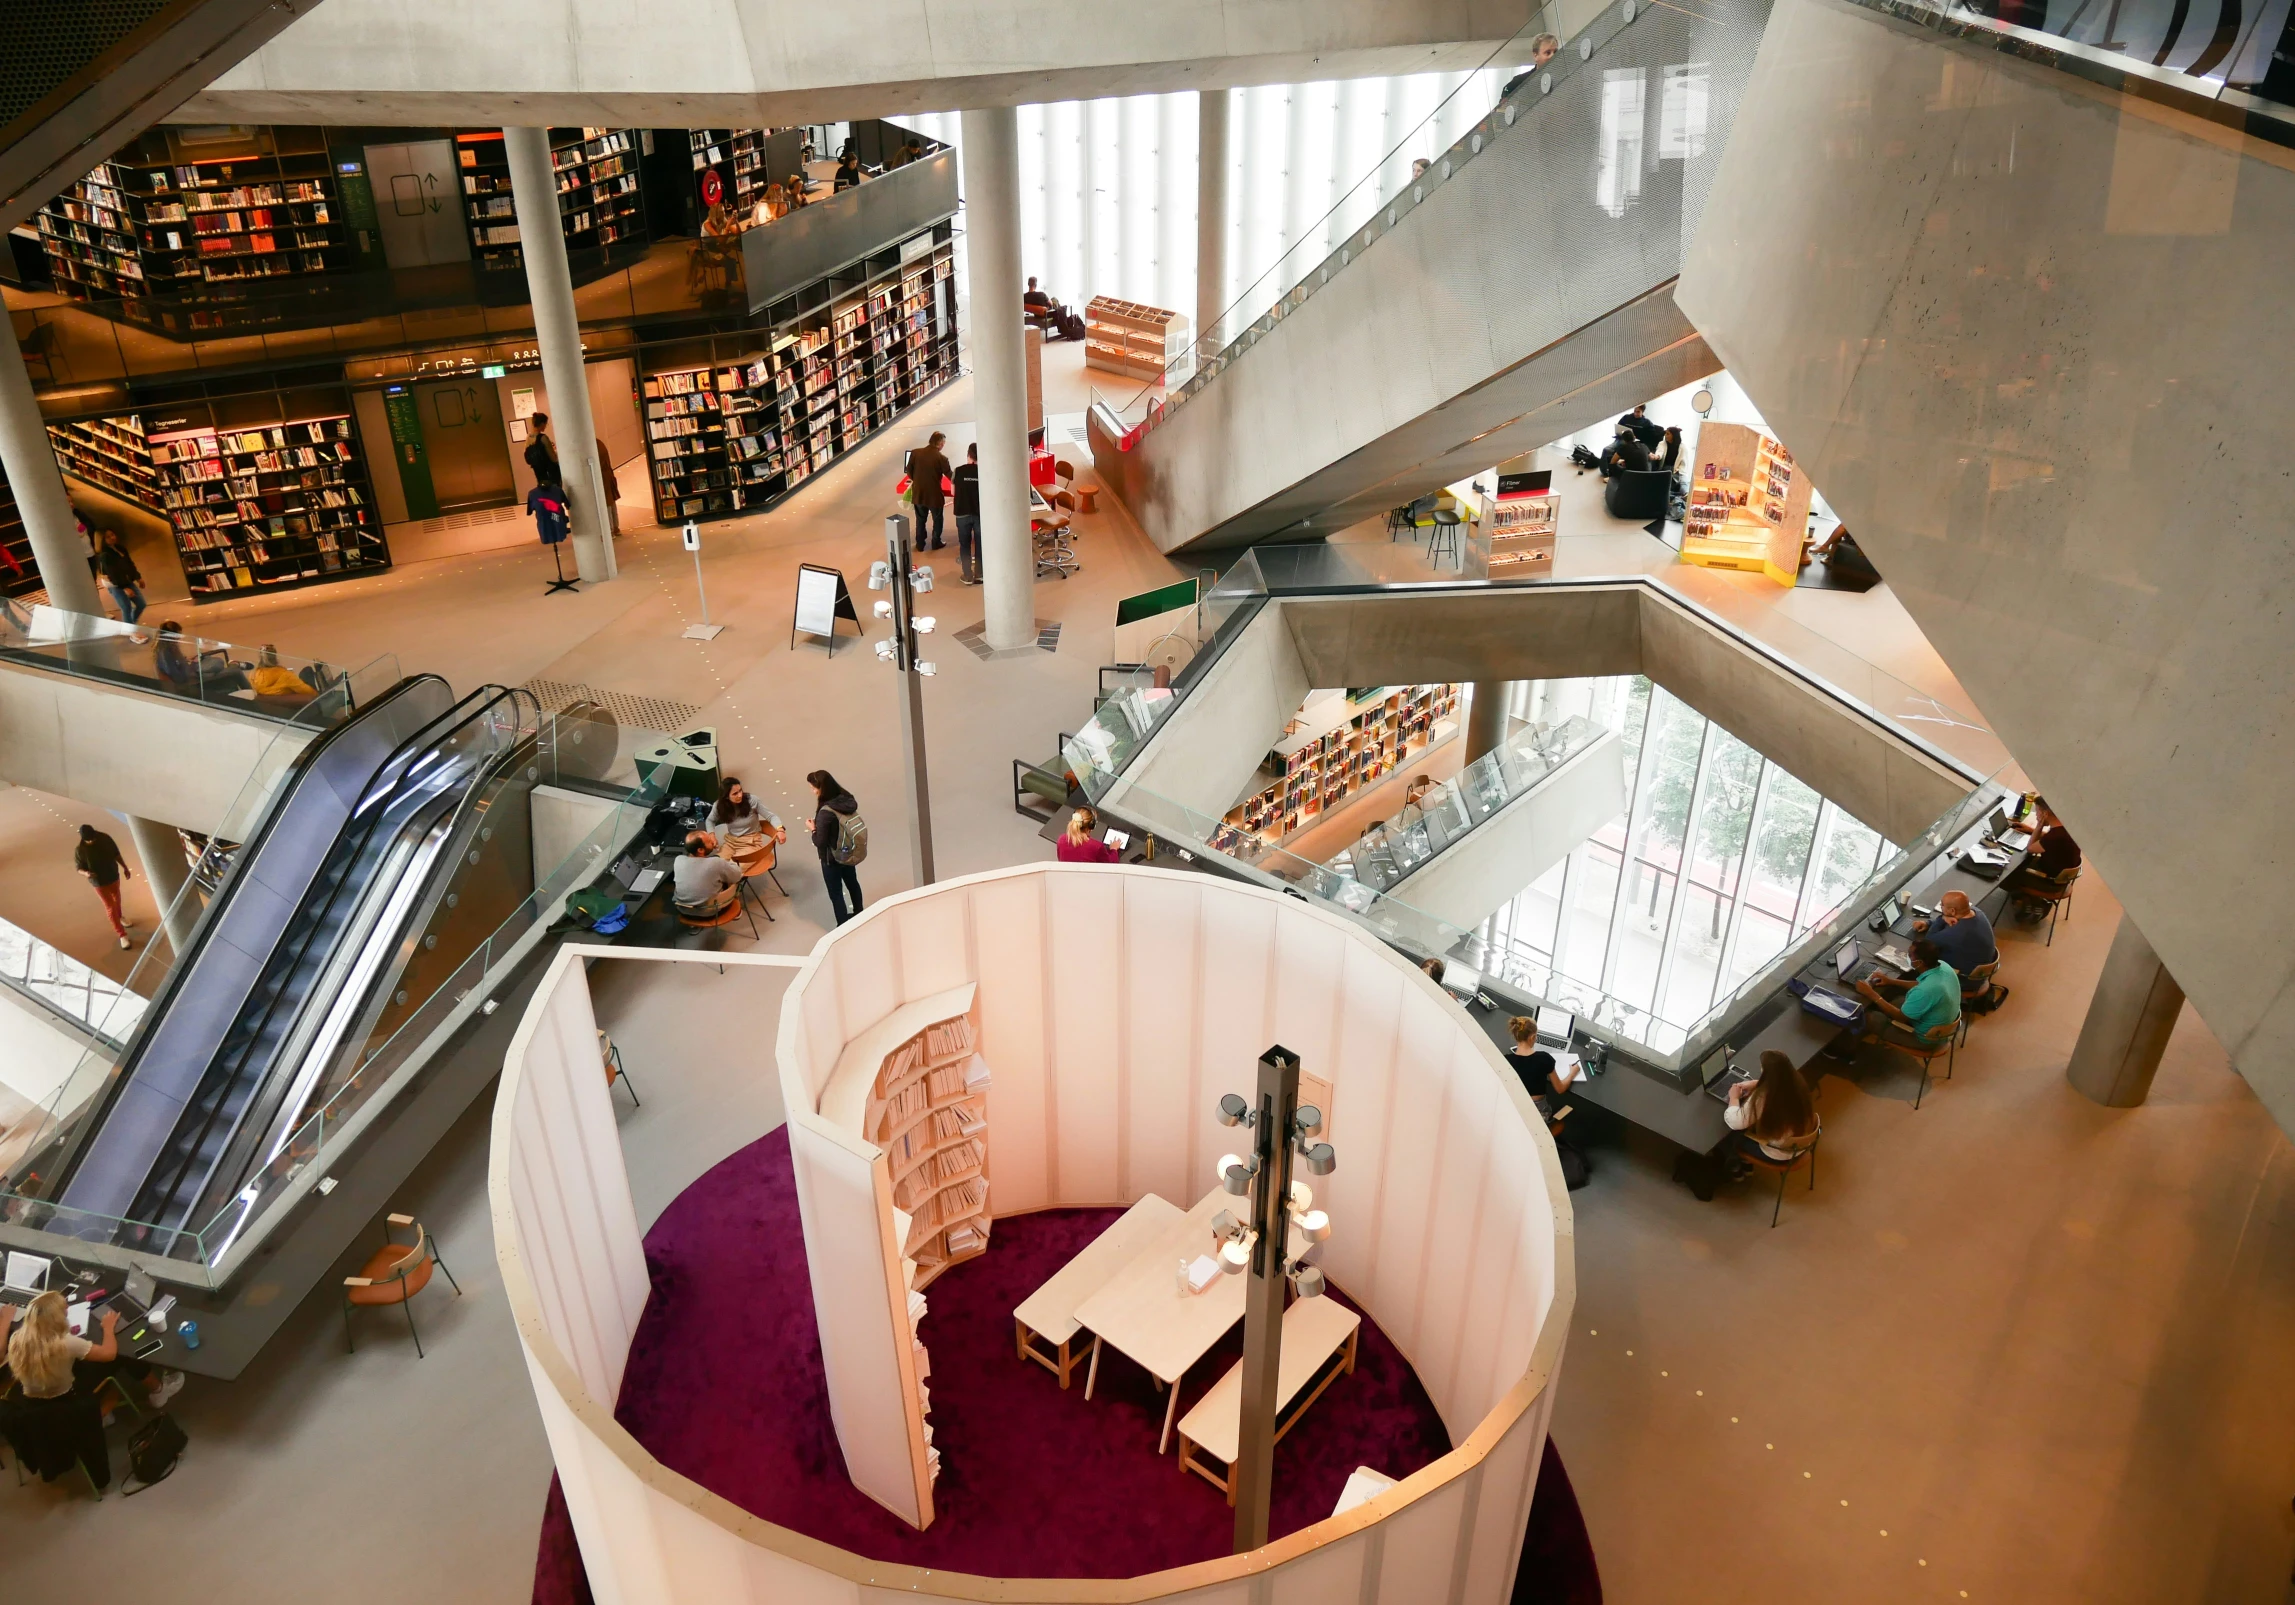 a large, spiral stair case in an indoor mall